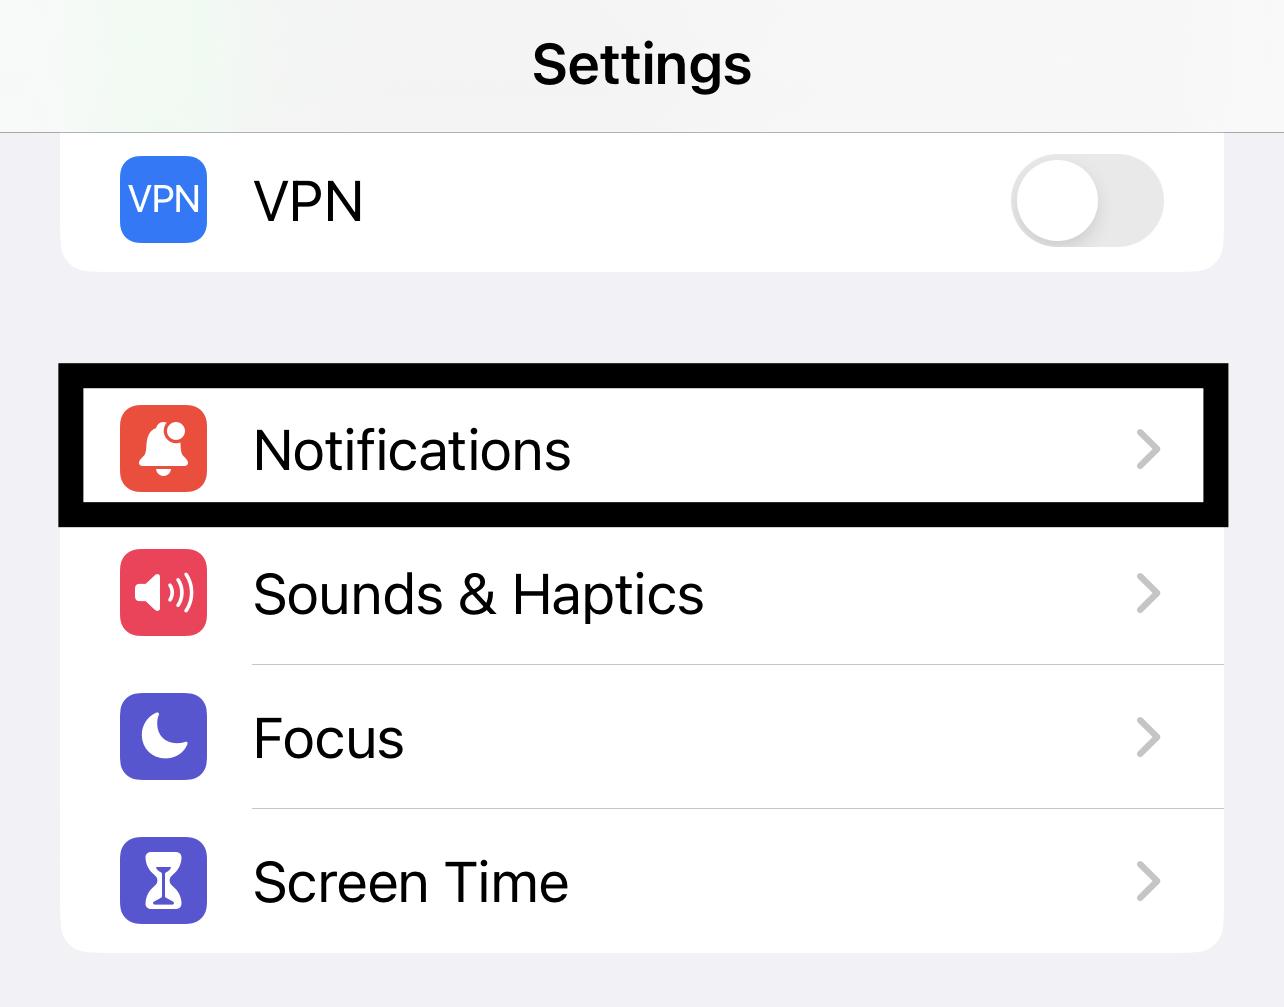 Allow Sptofy to show notifications on your iOS device to fix Spotify not showing on the lock Screen